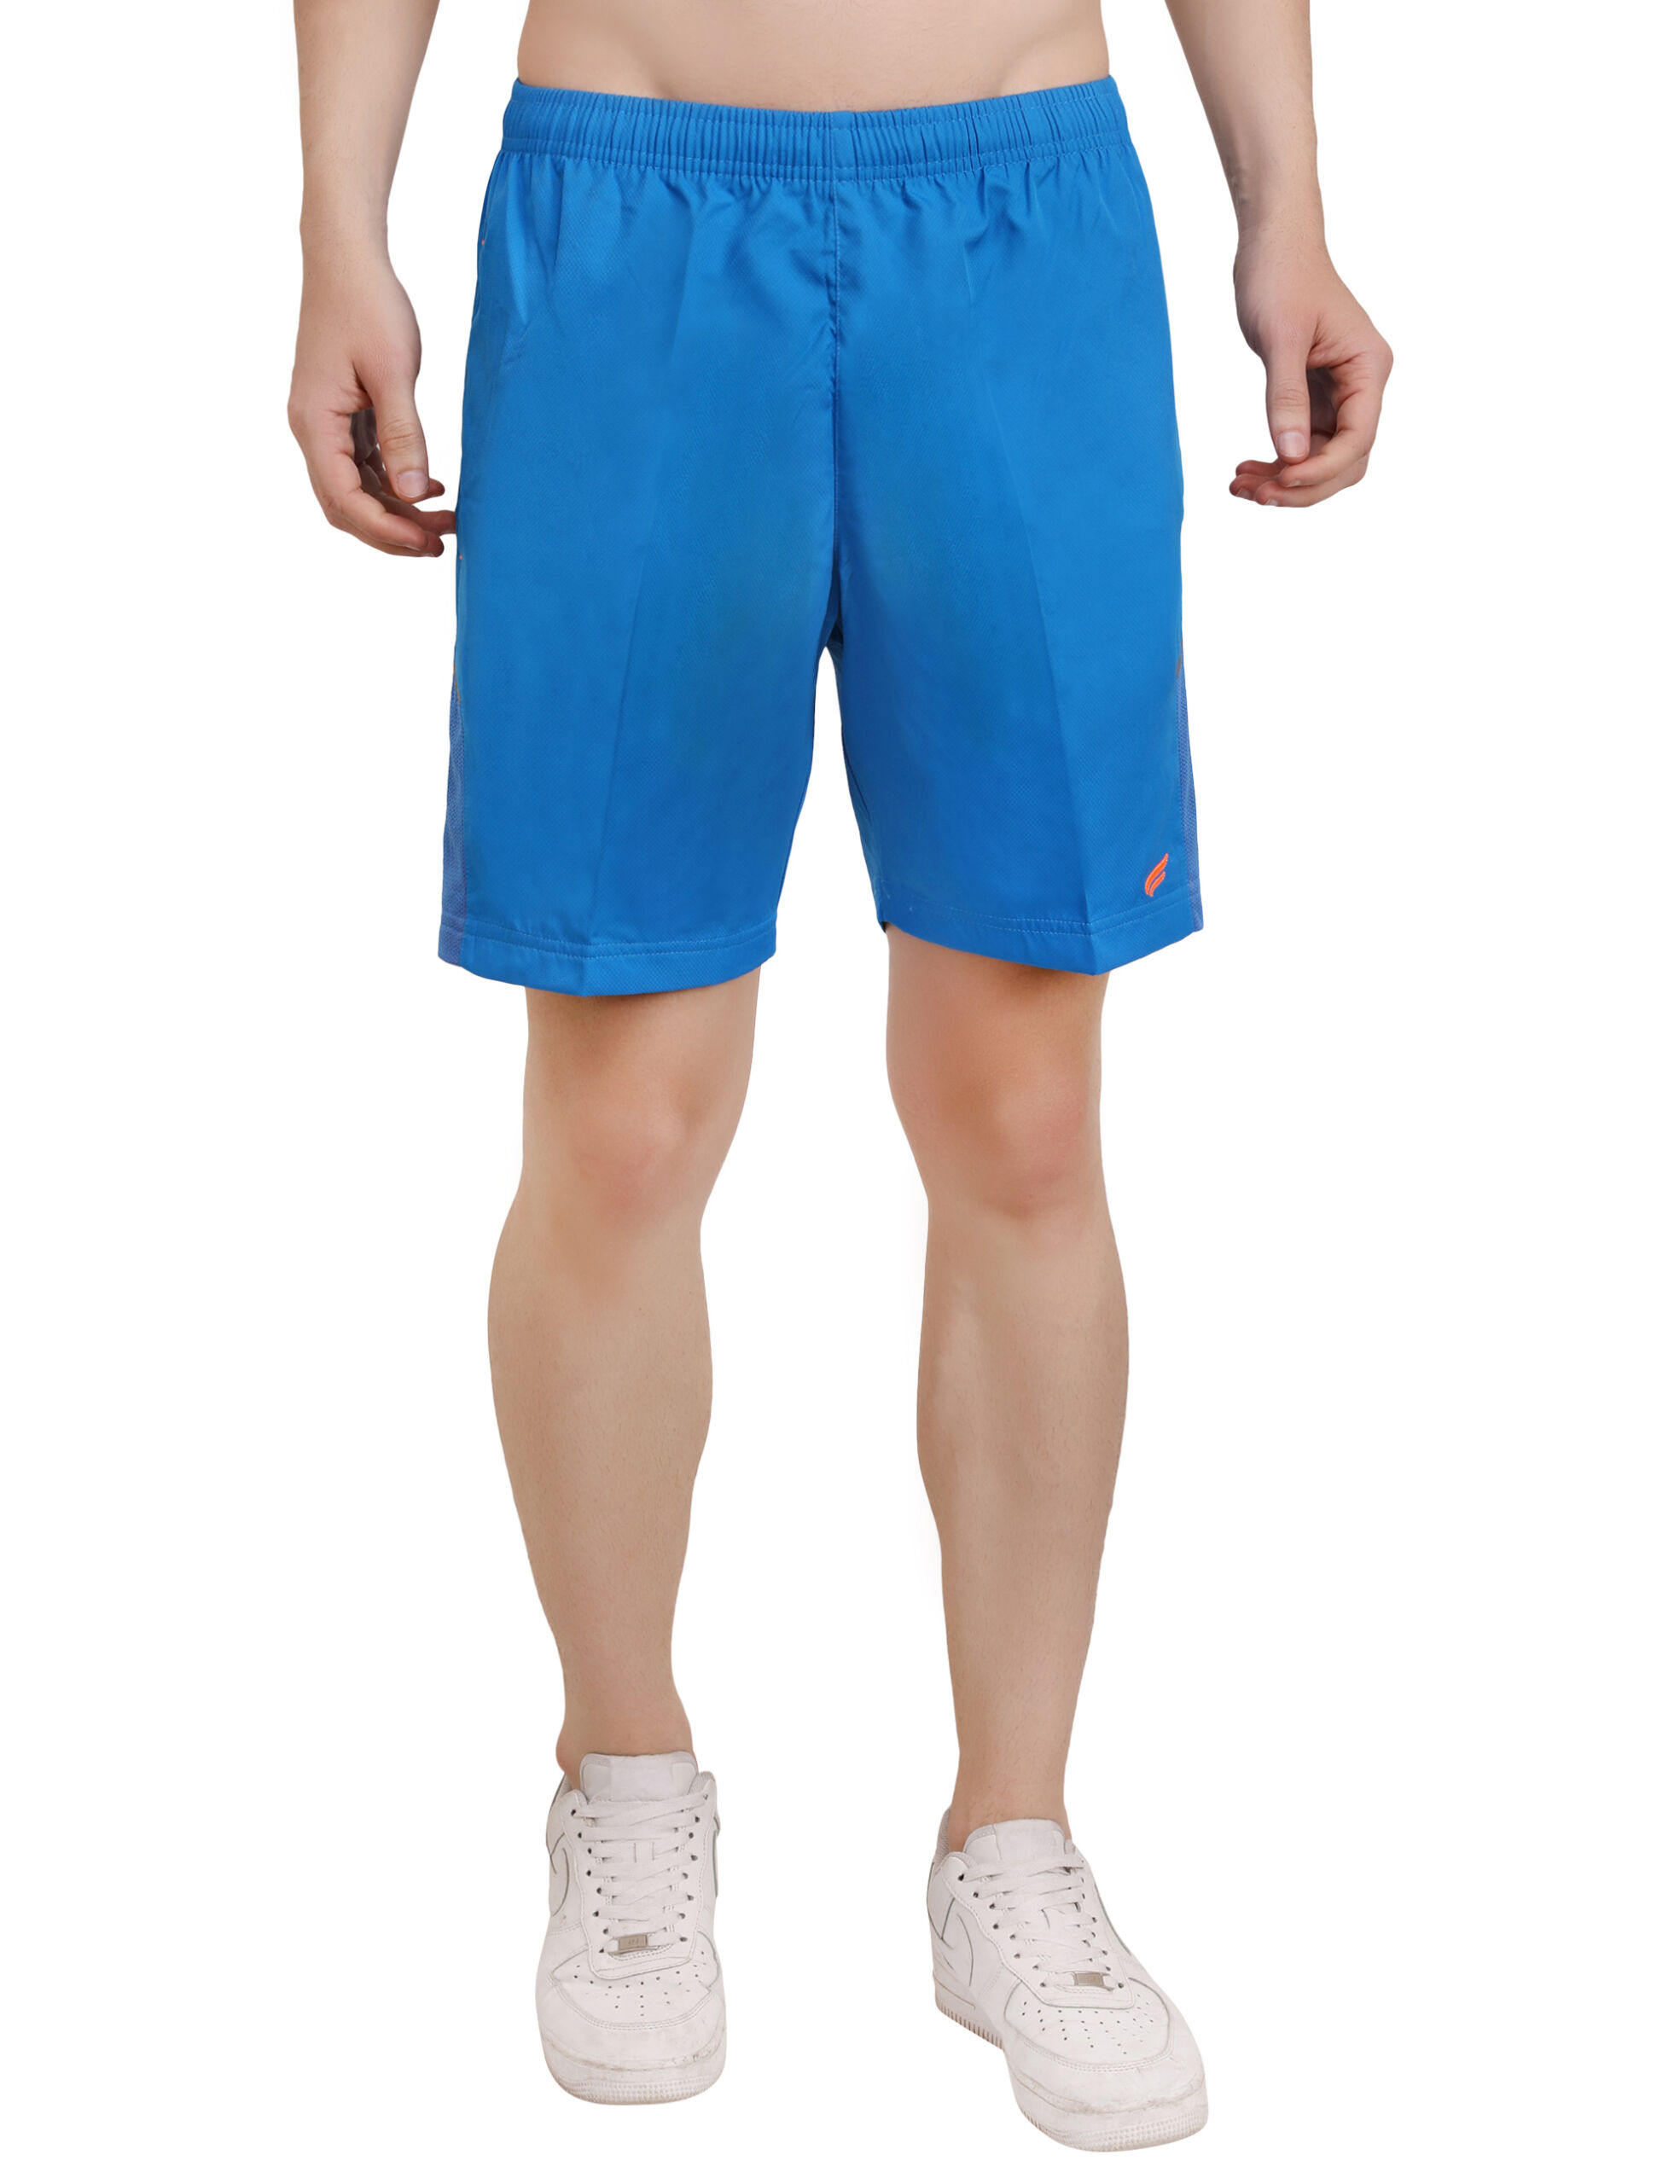 ASI Sporty India Shorts Blue Color